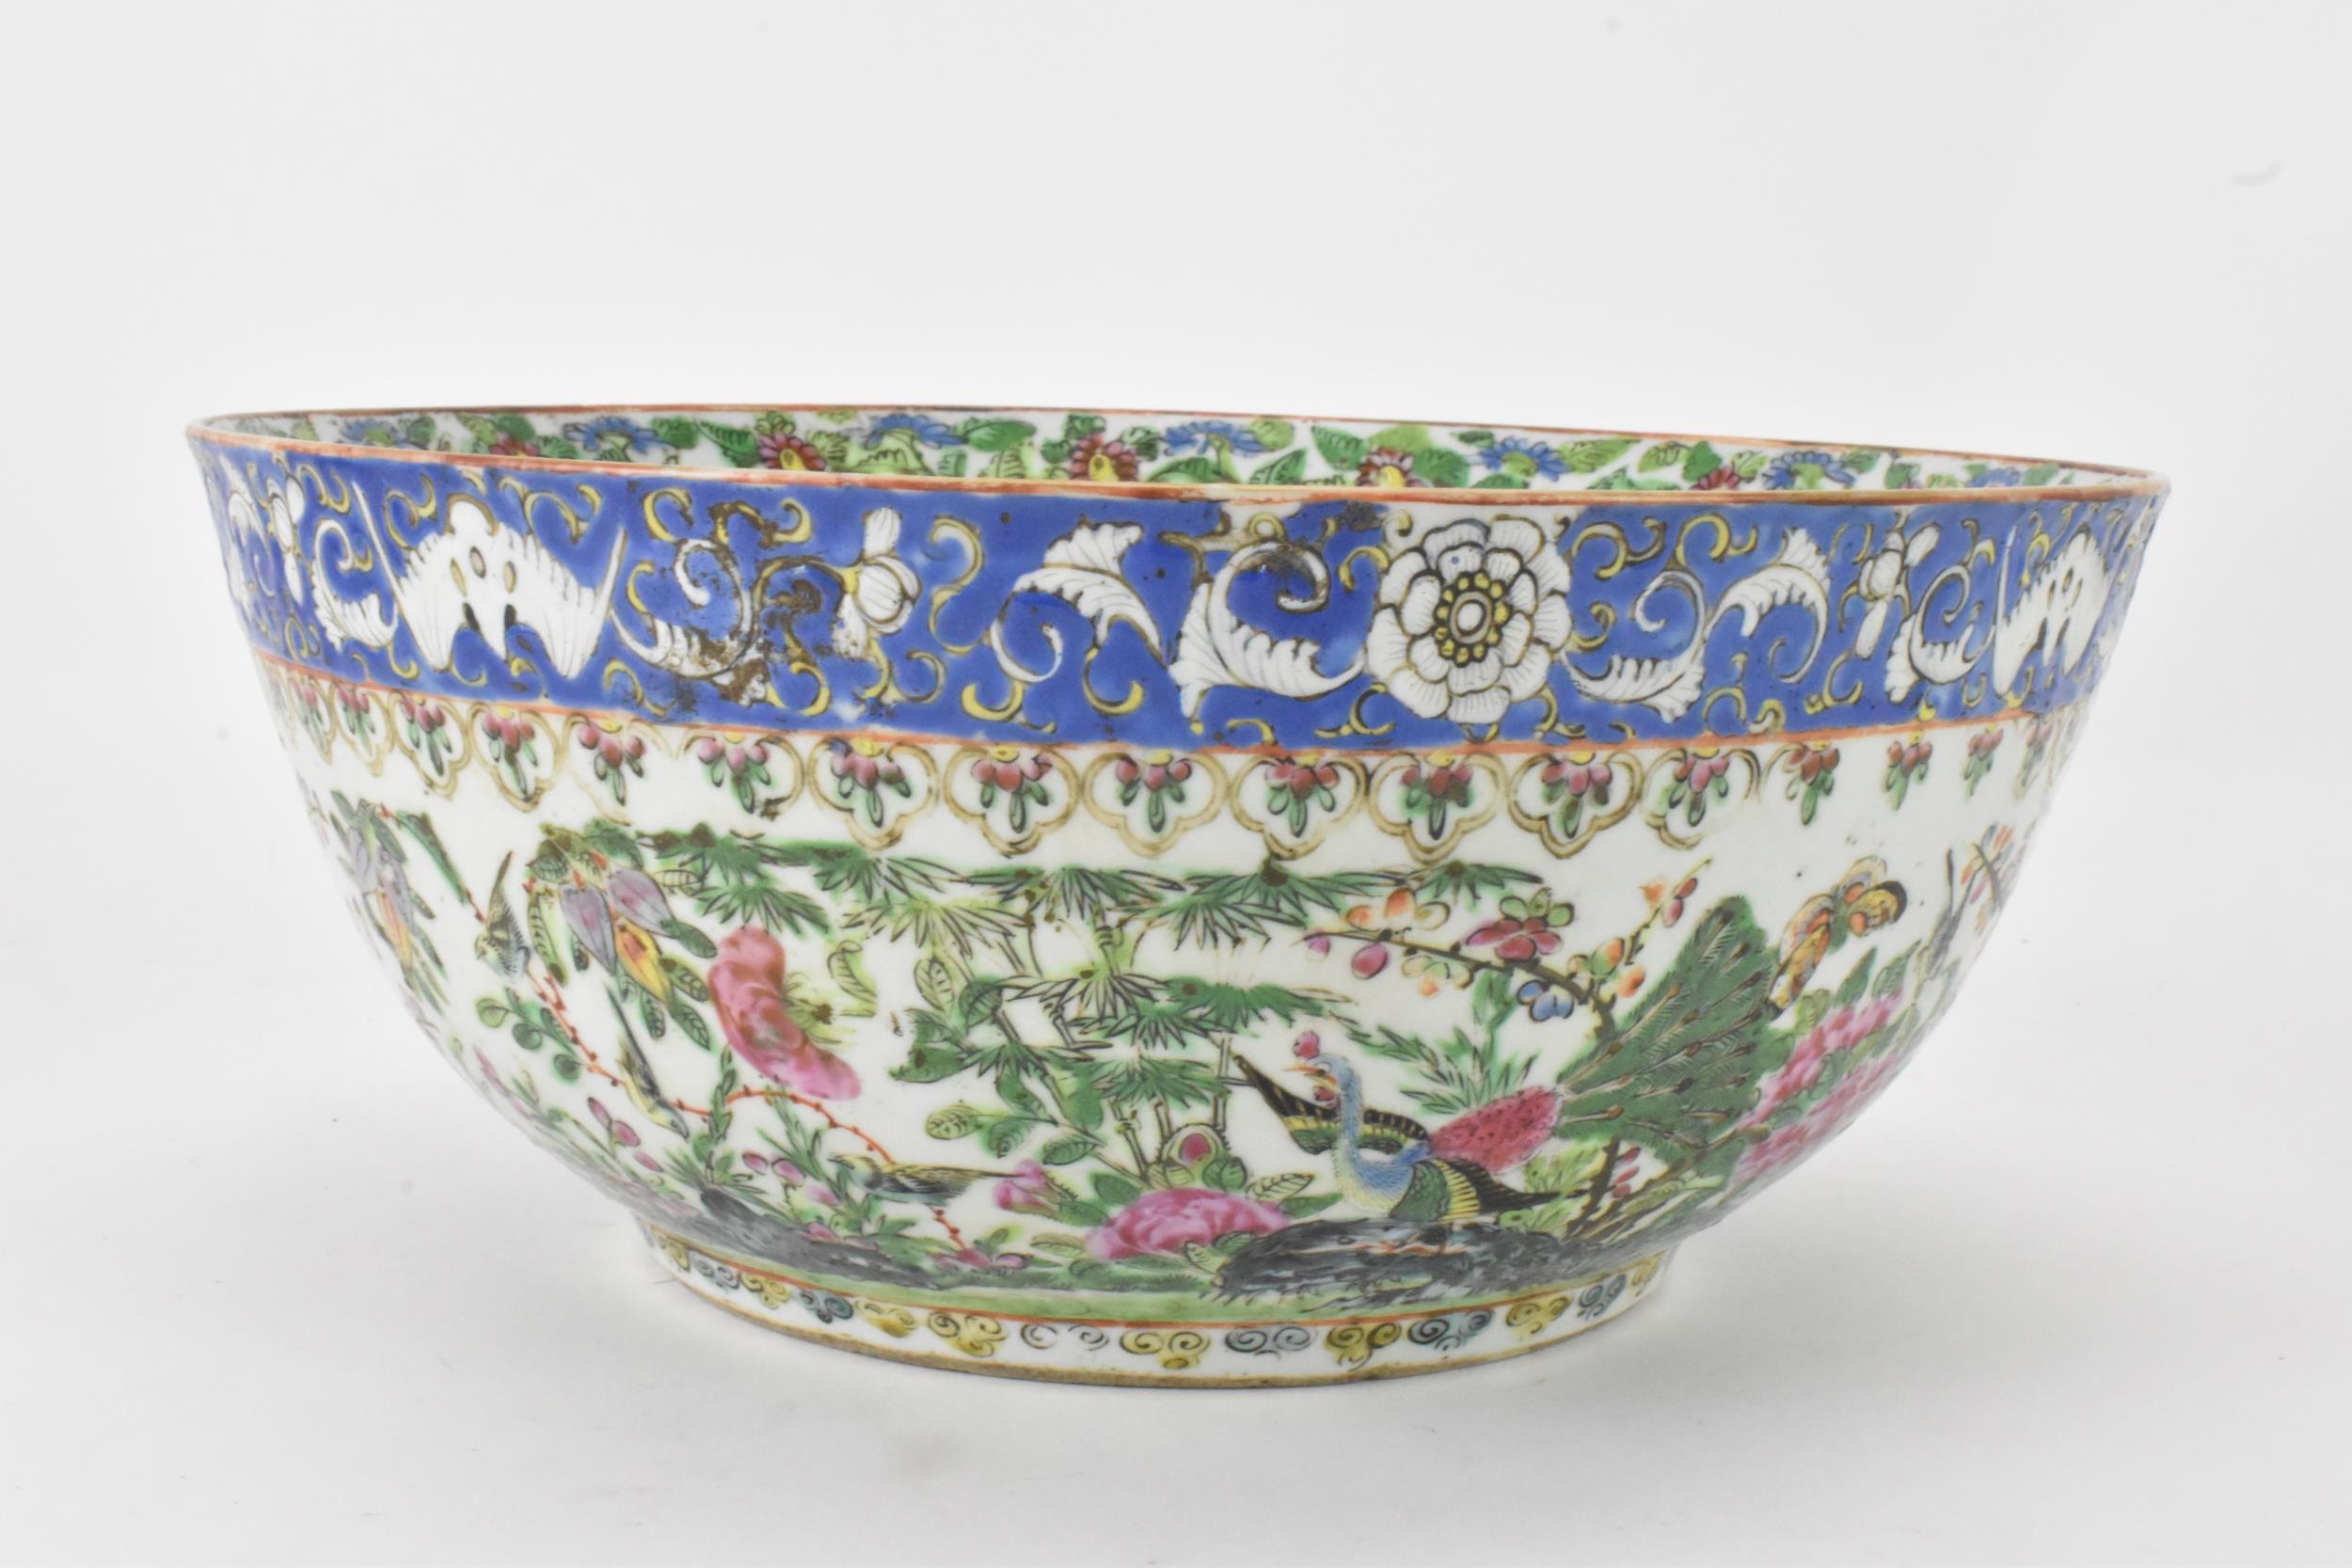 A near pair of Chinese export Canton famille rose punch bowls, Qing dynasty, late 19th century, - Image 11 of 15